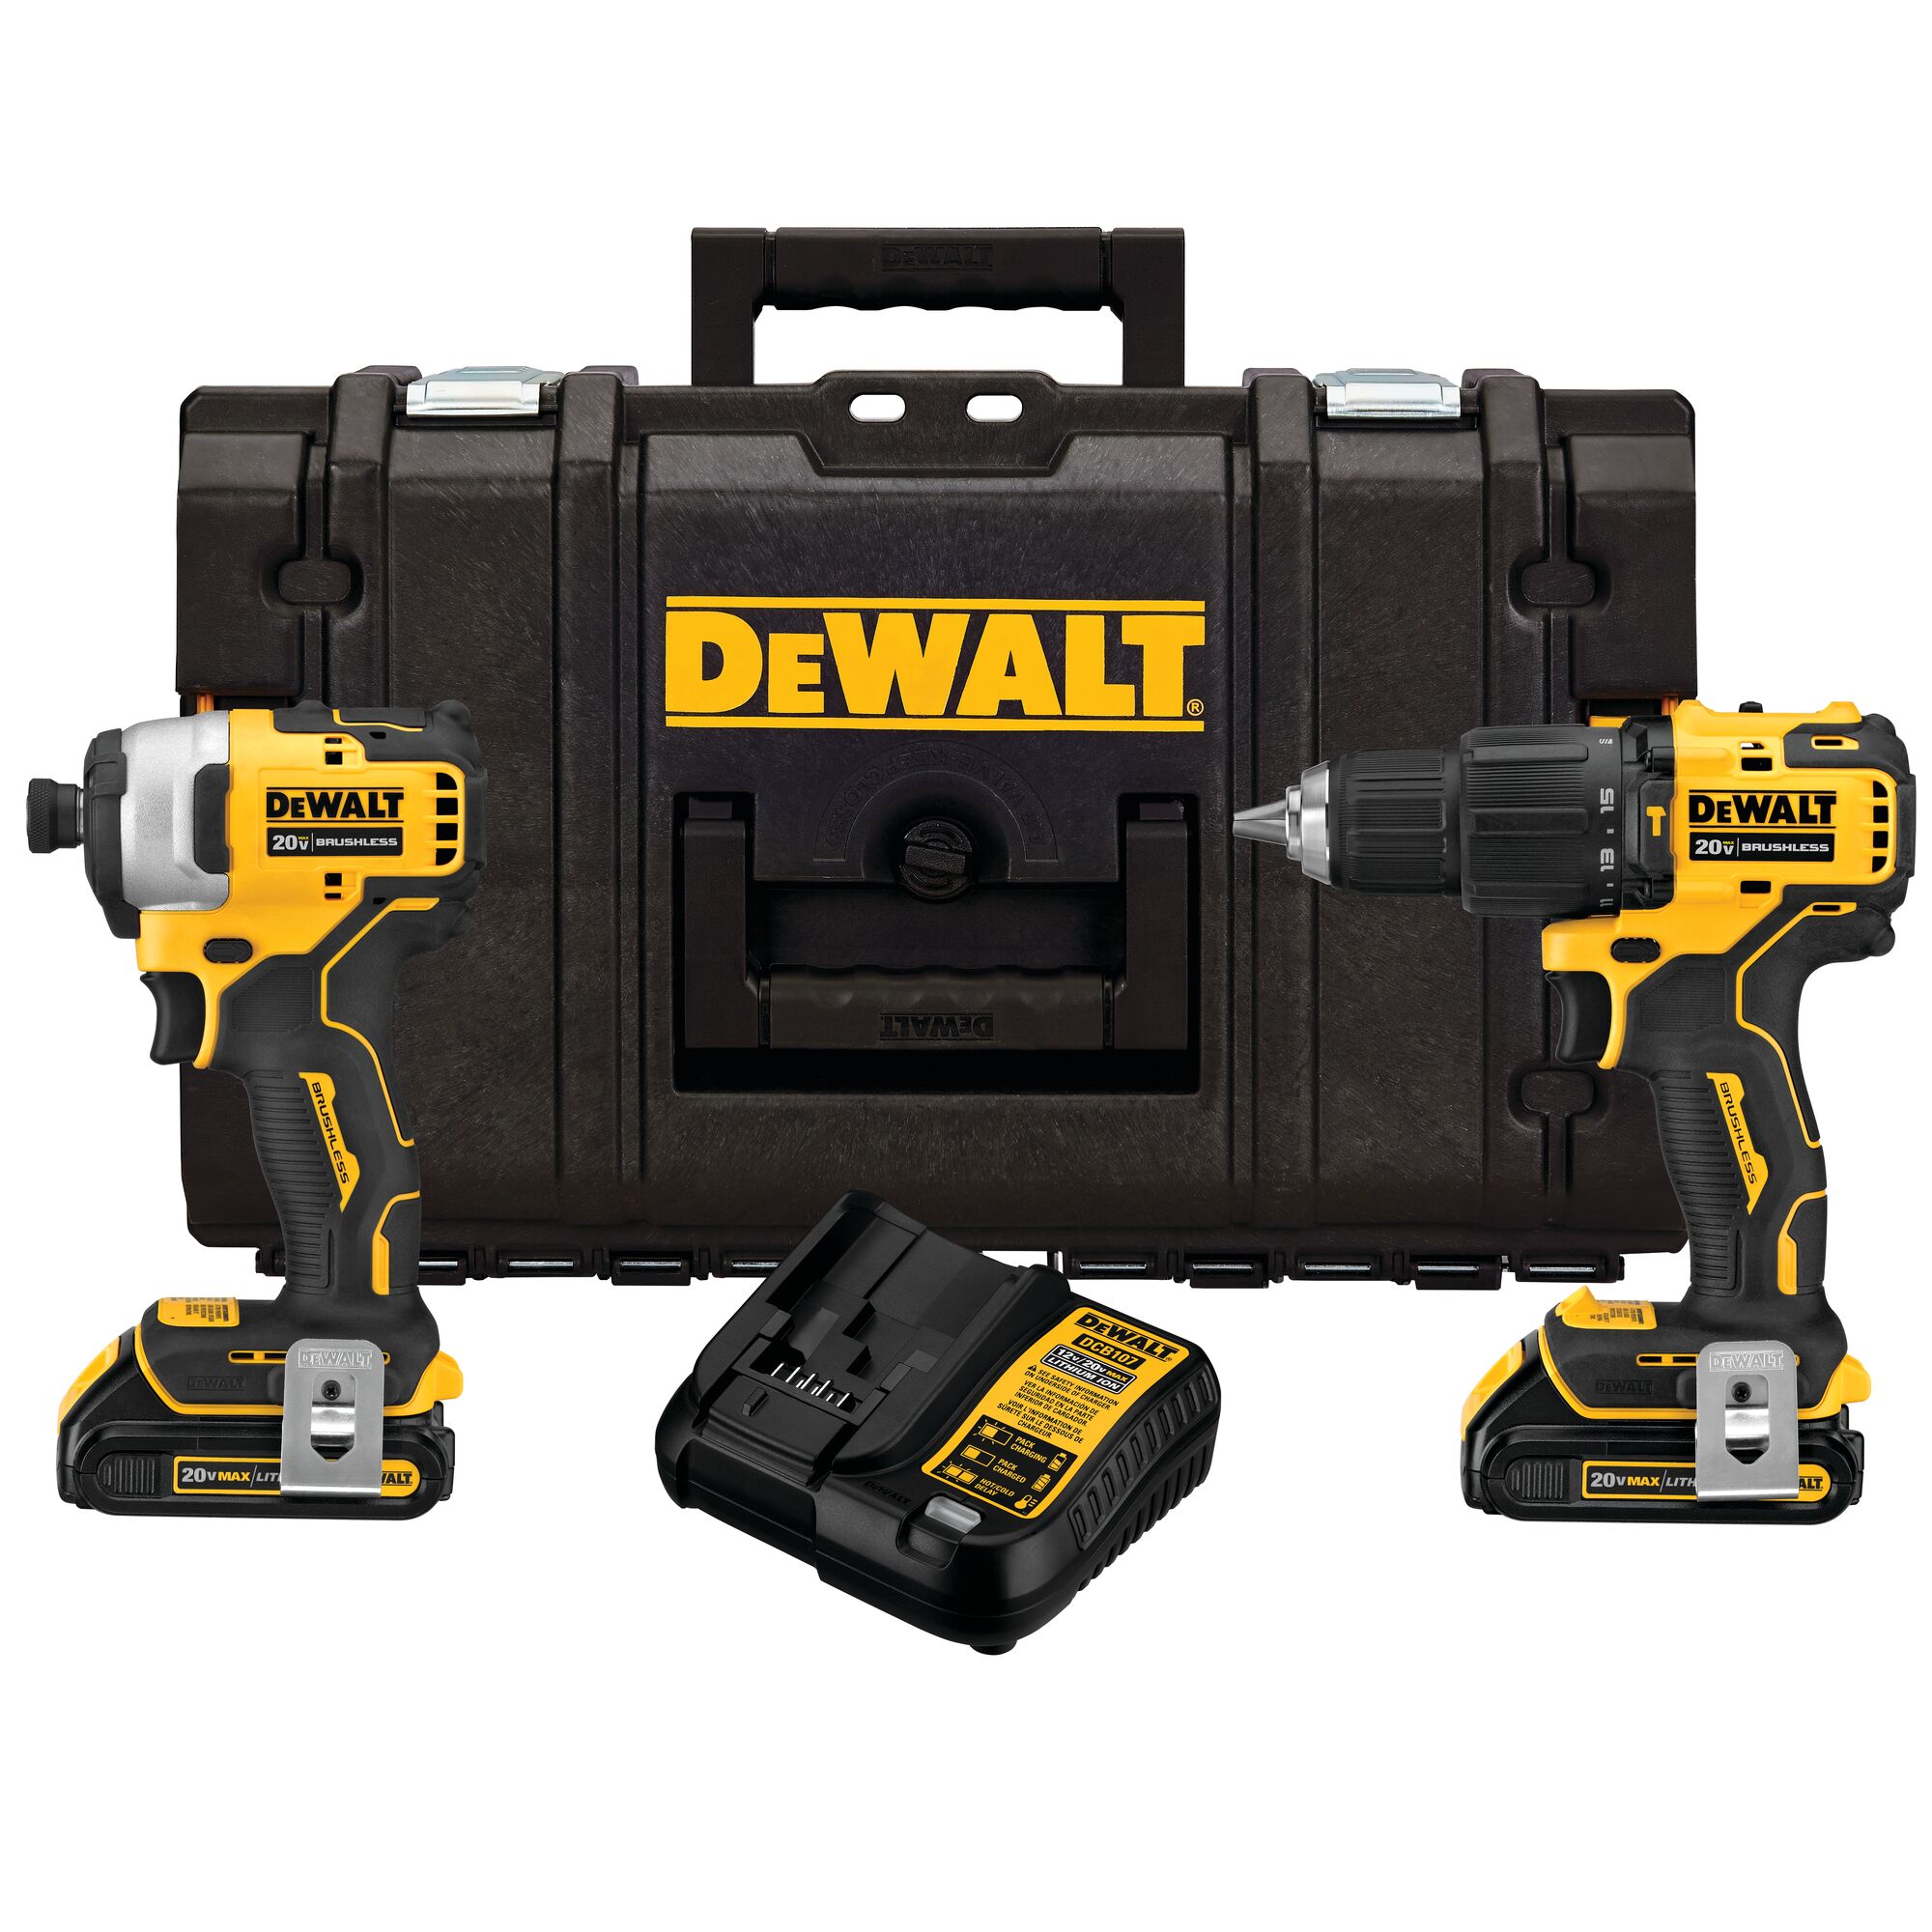 ATOMIC™ 20V MAX* Hammer Drill and Impact Driver with TOUGHSYSTEM